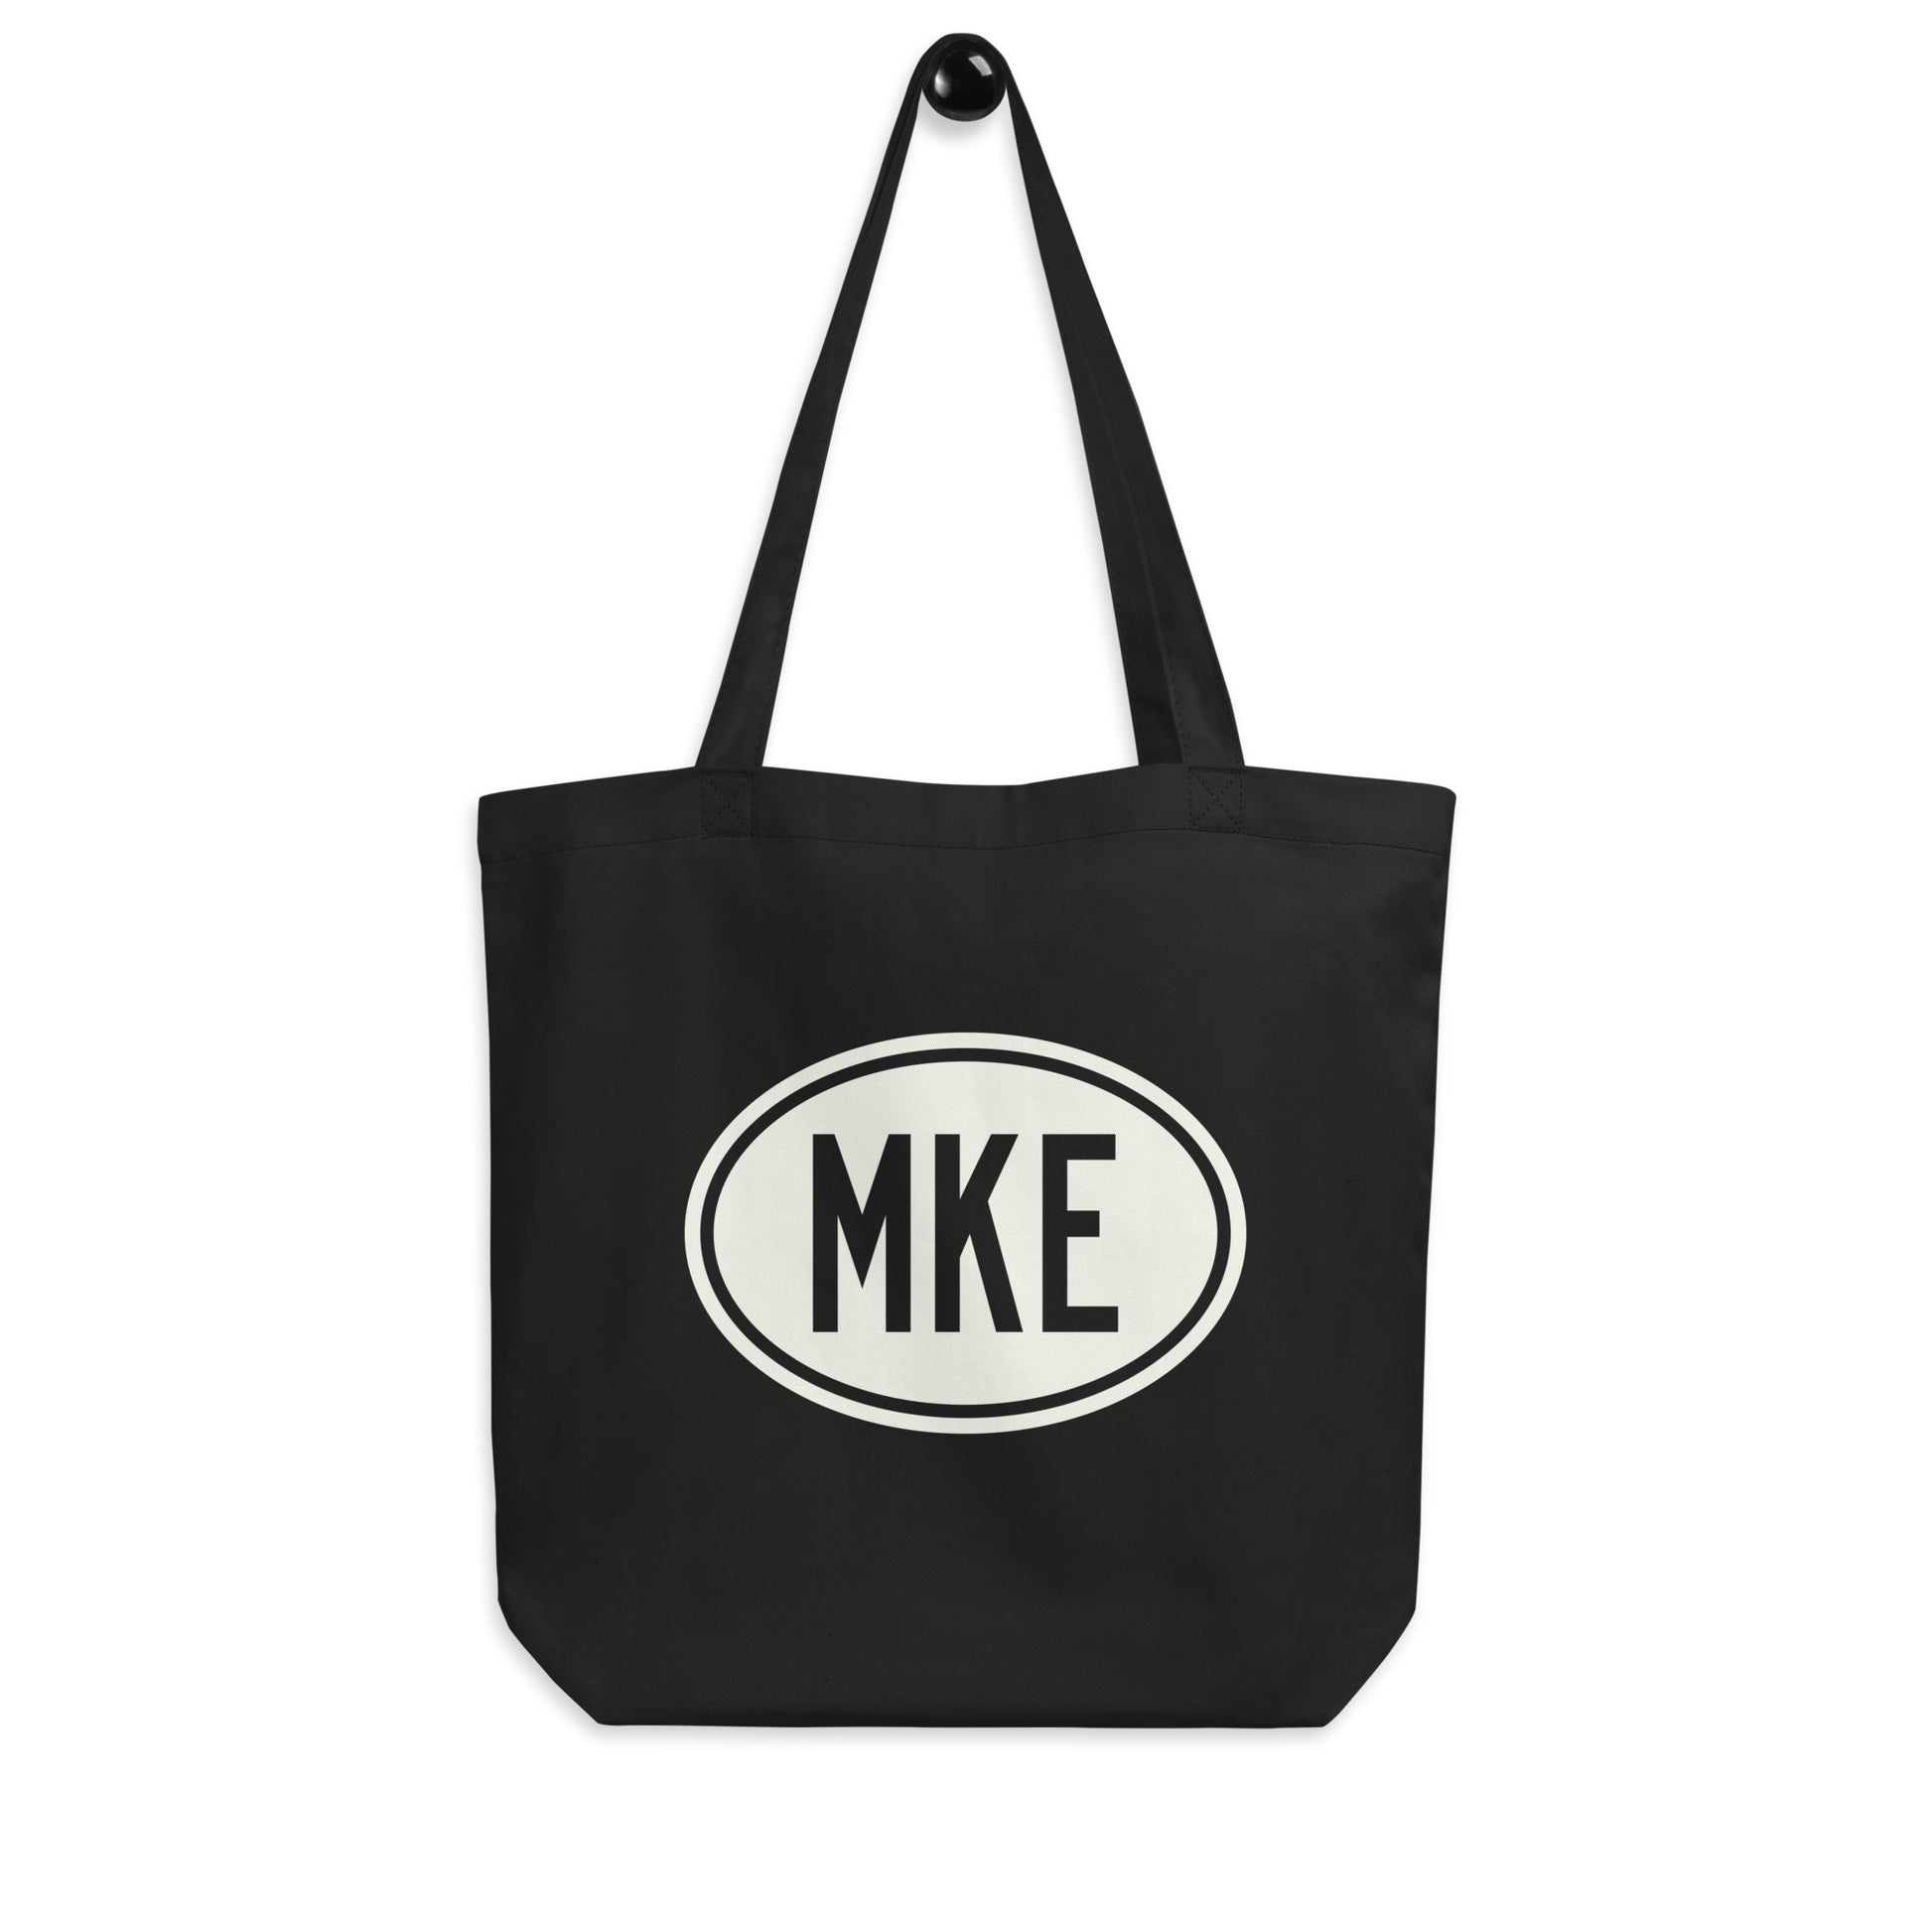 Unique Travel Gift Organic Tote - White Oval • MKE Milwaukee • YHM Designs - Image 04